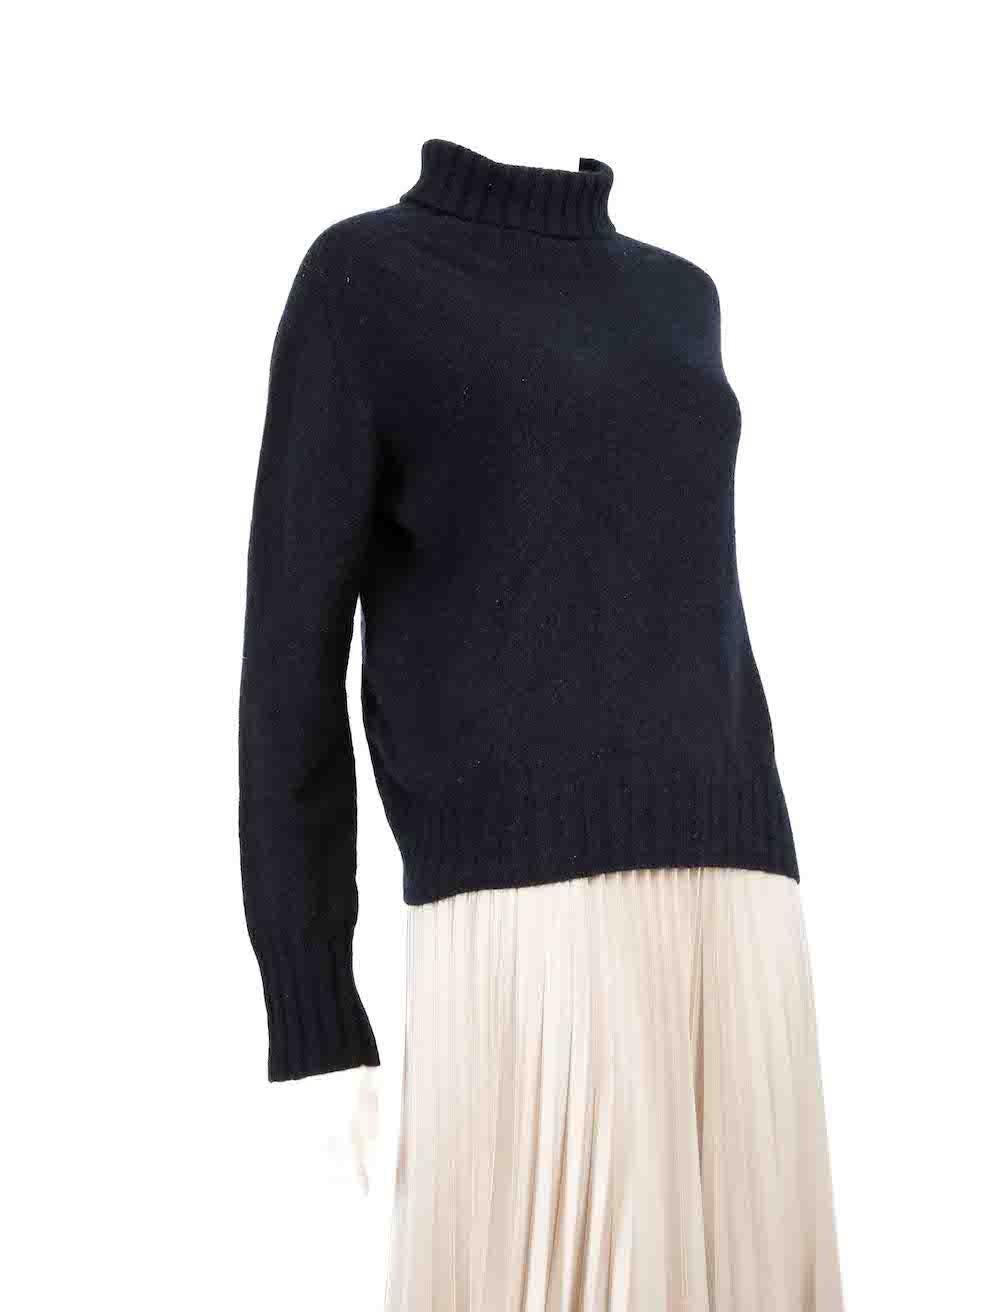 CONDITION is Very good. Minimal wear to jumper is evident. Minimal pilling to overall material on this used Margaret Howell designer resale item.
 
 
 
 Details
 
 
 Navy
 
 Cashmere
 
 Knit jumper
 
 Long sleeves
 
 Turtleneck
 
 
 
 
 
 Made in